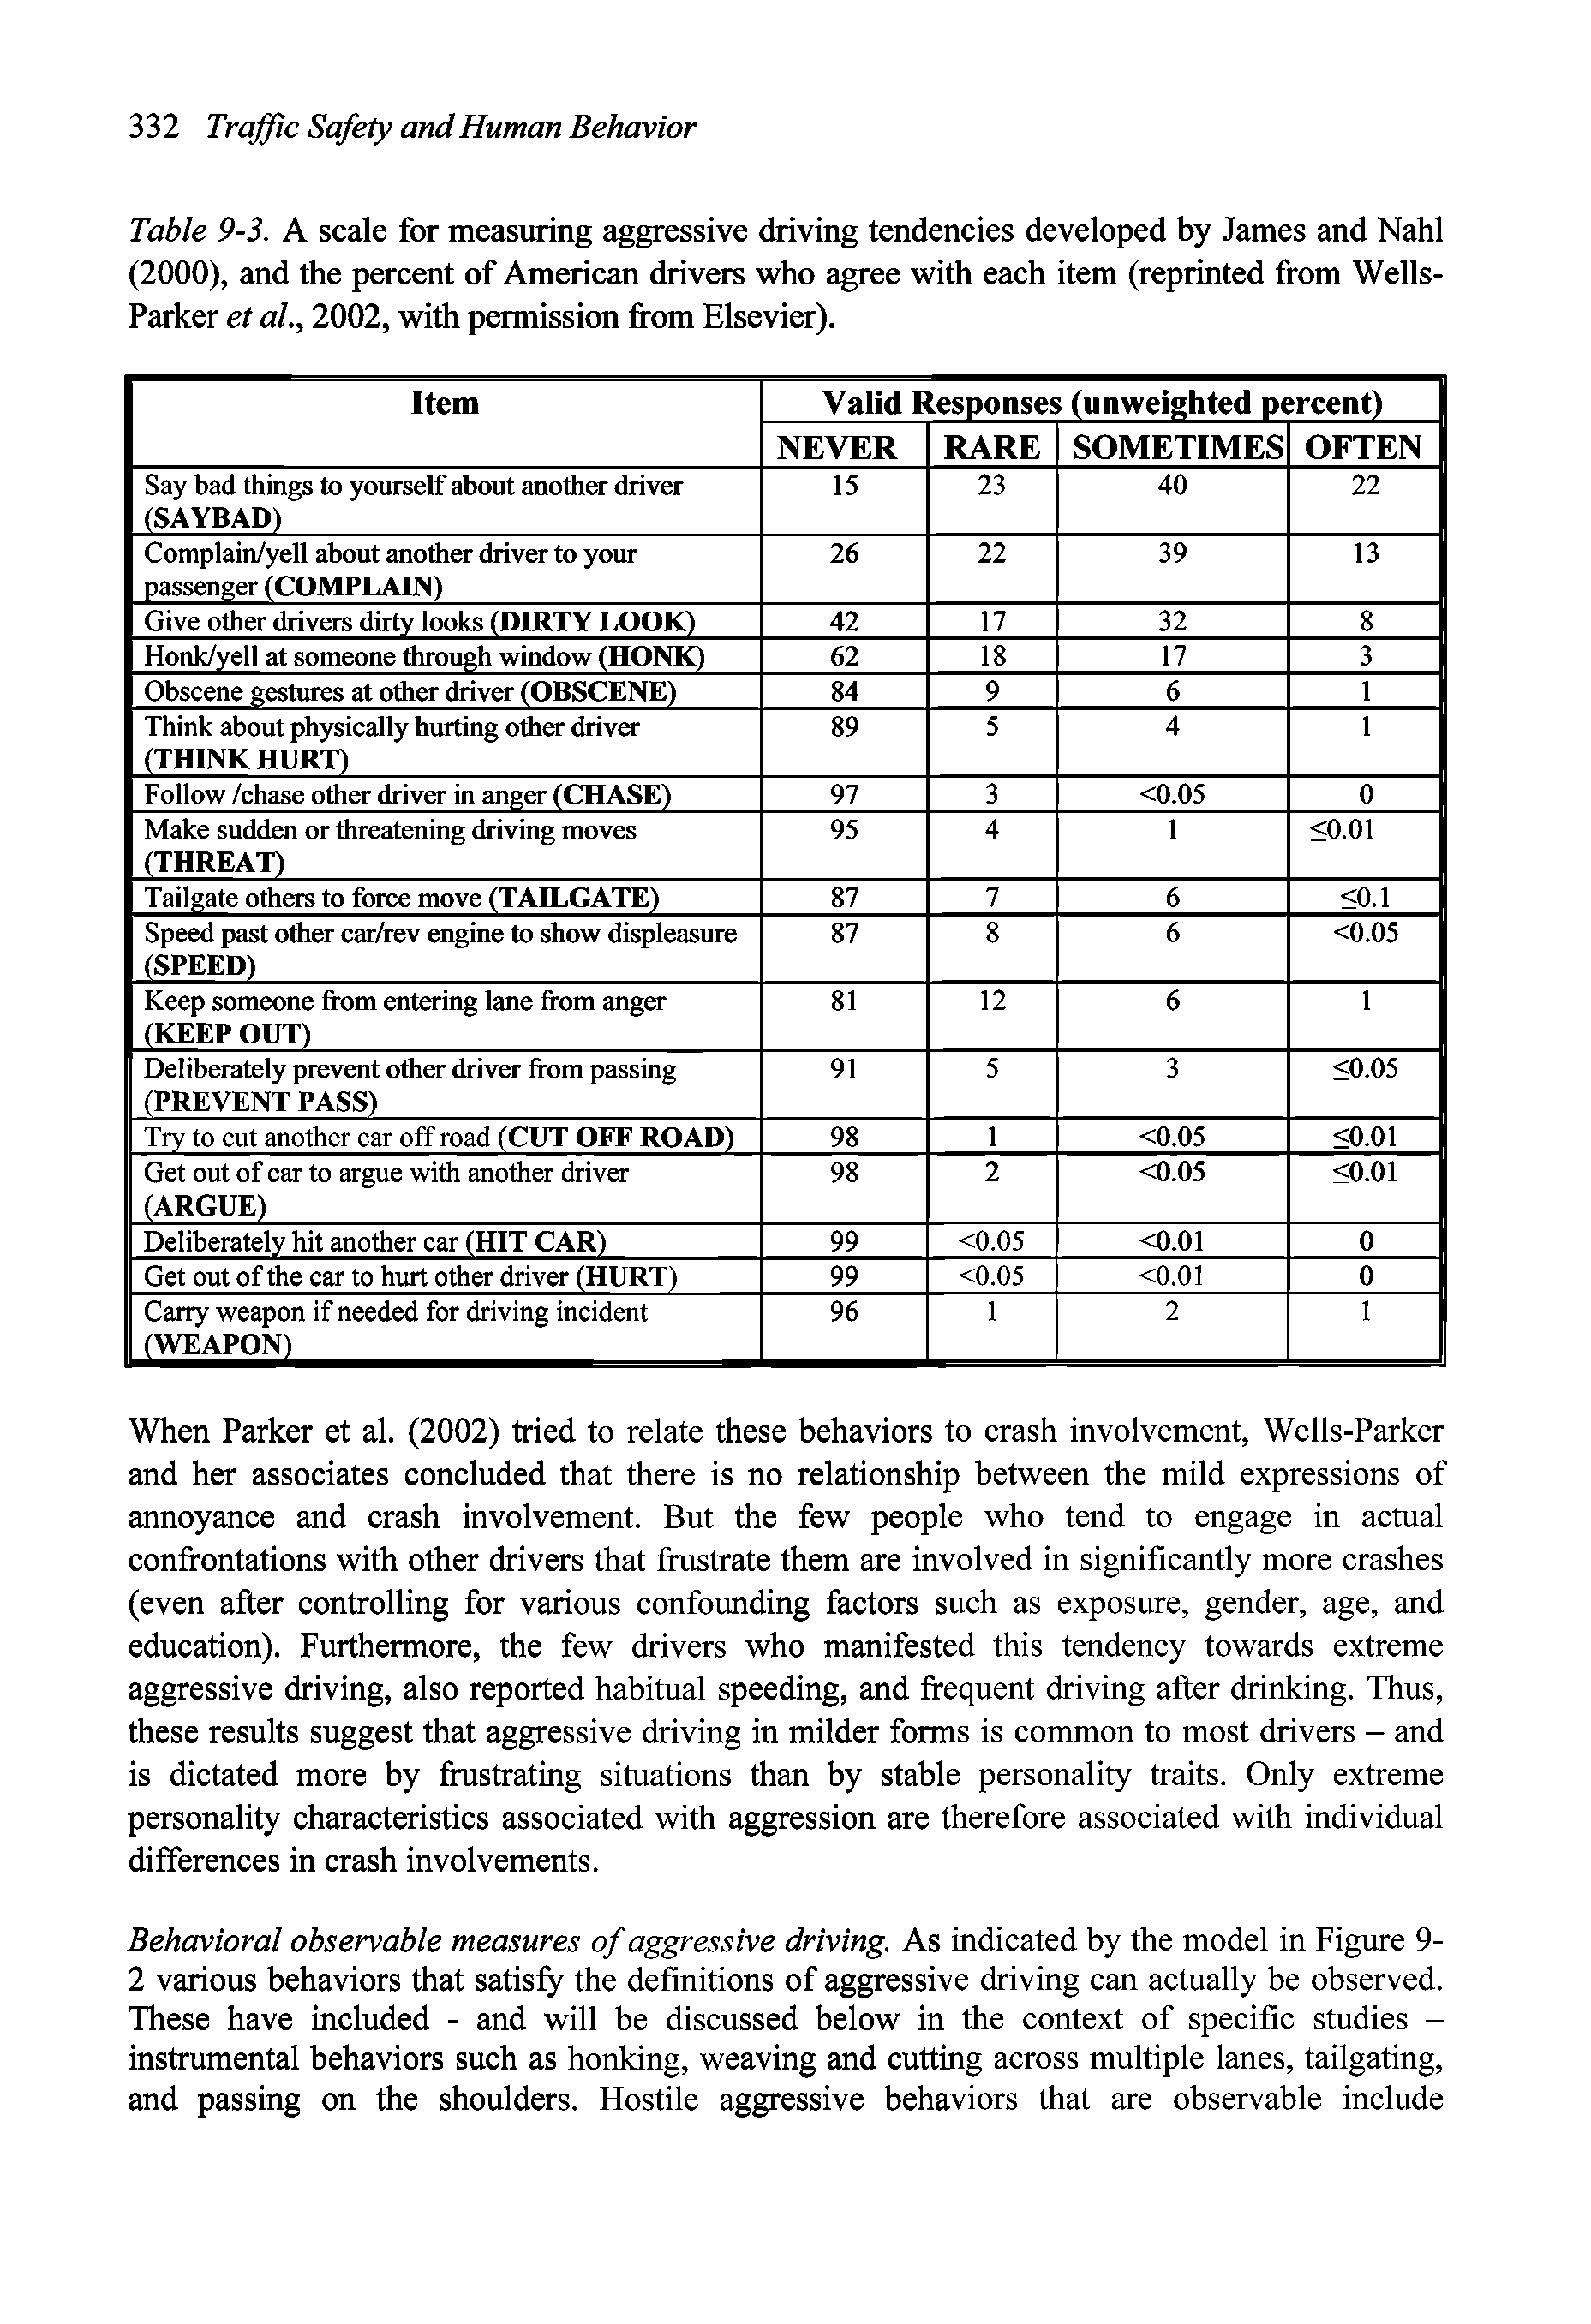 Table 9-3. A scale for measuring aggressive driving tendencies developed by James and Nahl (2000), and the percent of Americmi drivers who agree with each item (reprinted from Wells-Paiker et aL, 2002, with permission from Elsevier).